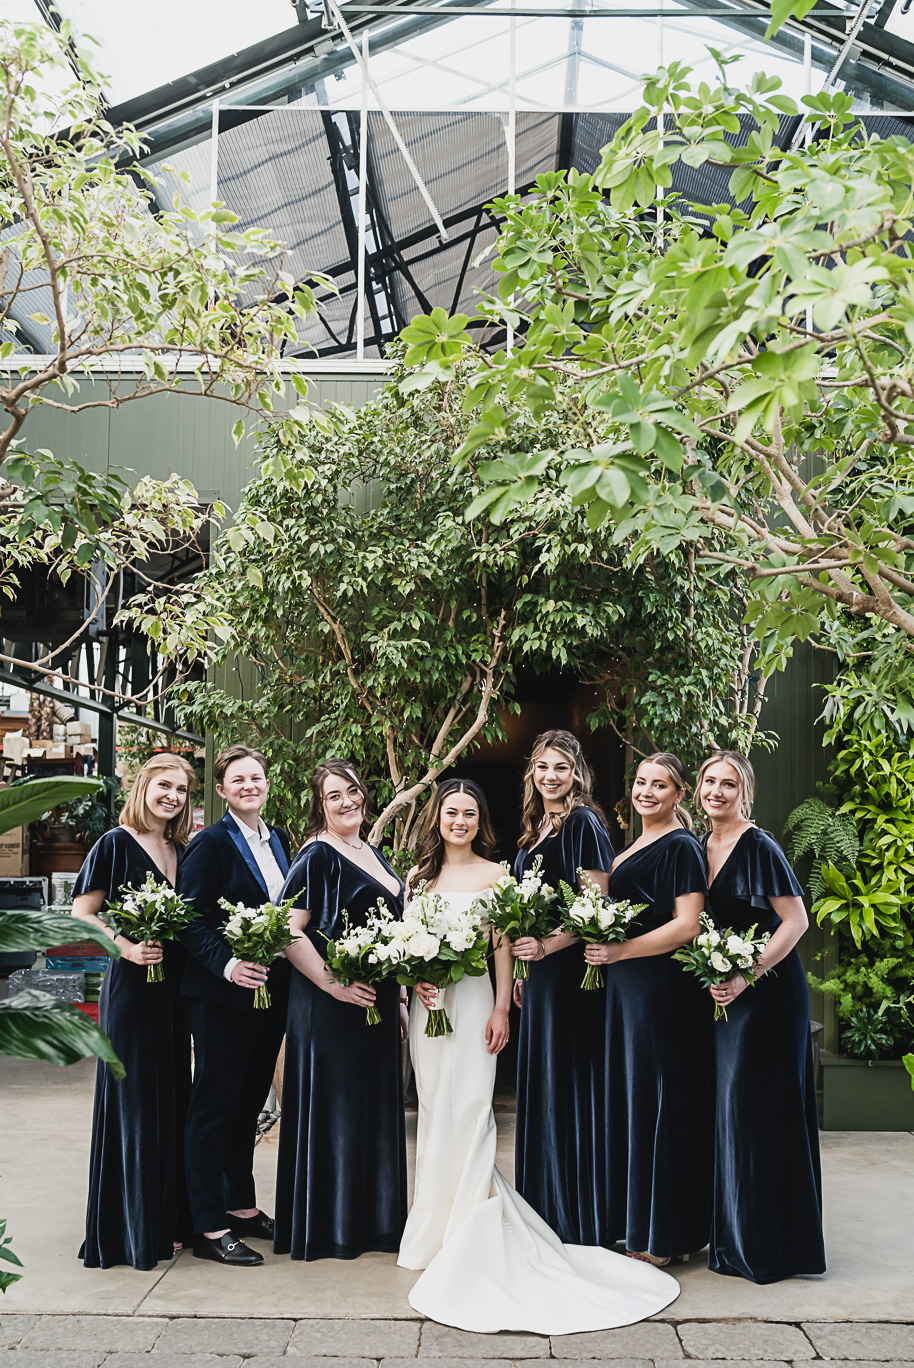 Navy and black spring Planterra wedding in West Bloomfield, Michigan provided by Kari Dawson, top-rated Metro Detroit wedding photographer, and her team.